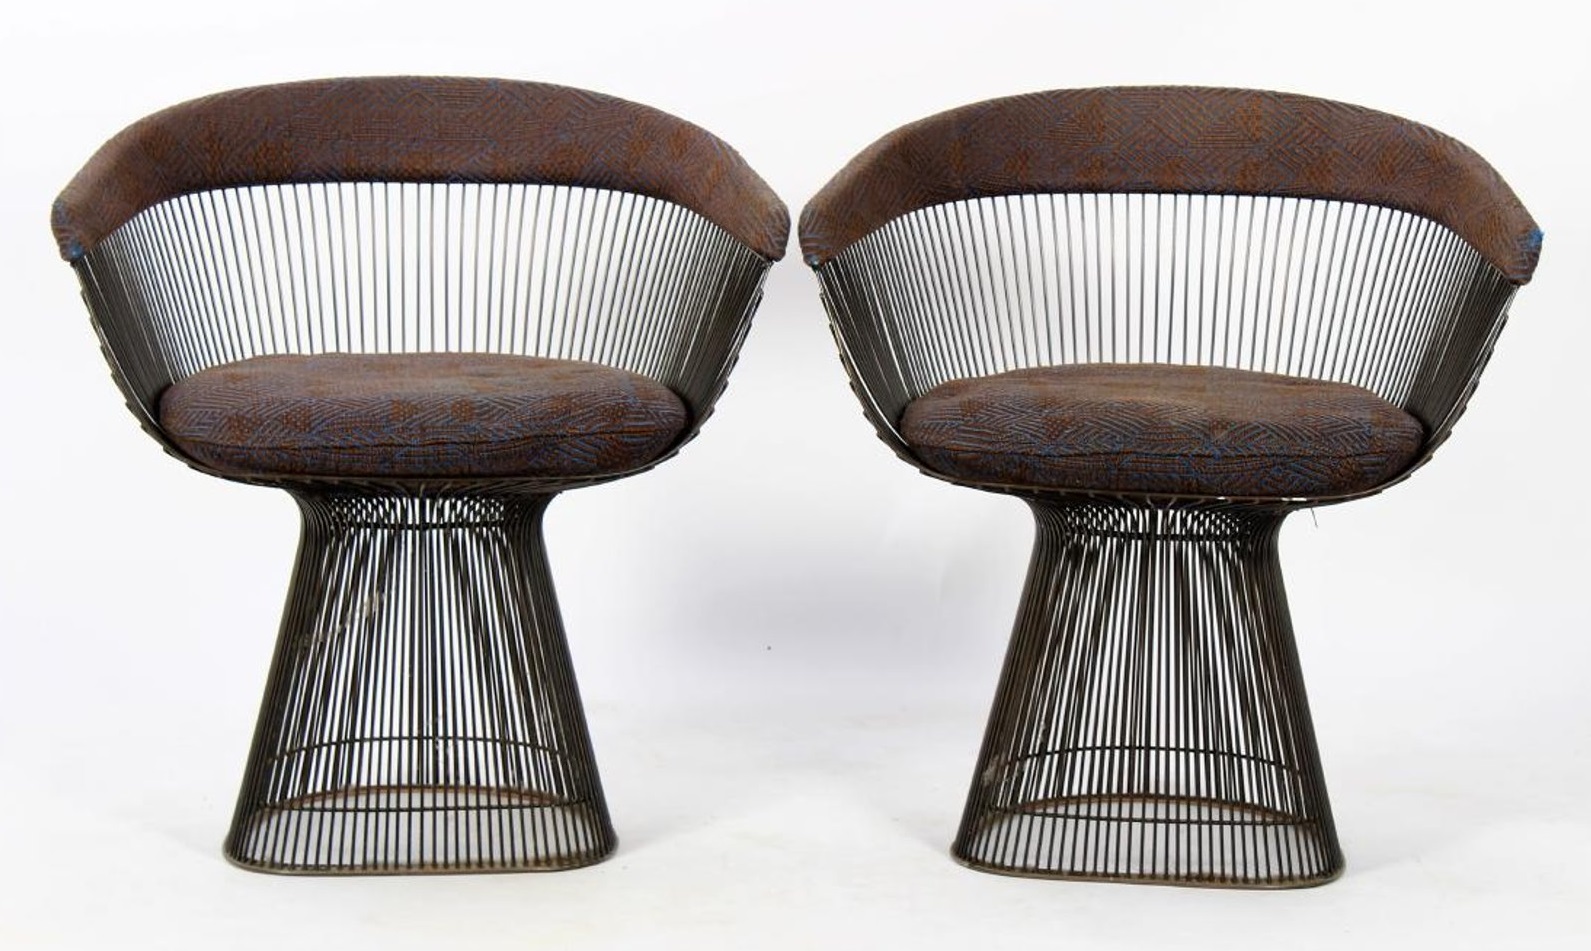 Pair Of Warren Platner For Knoll Chairs. Sold For $2,500